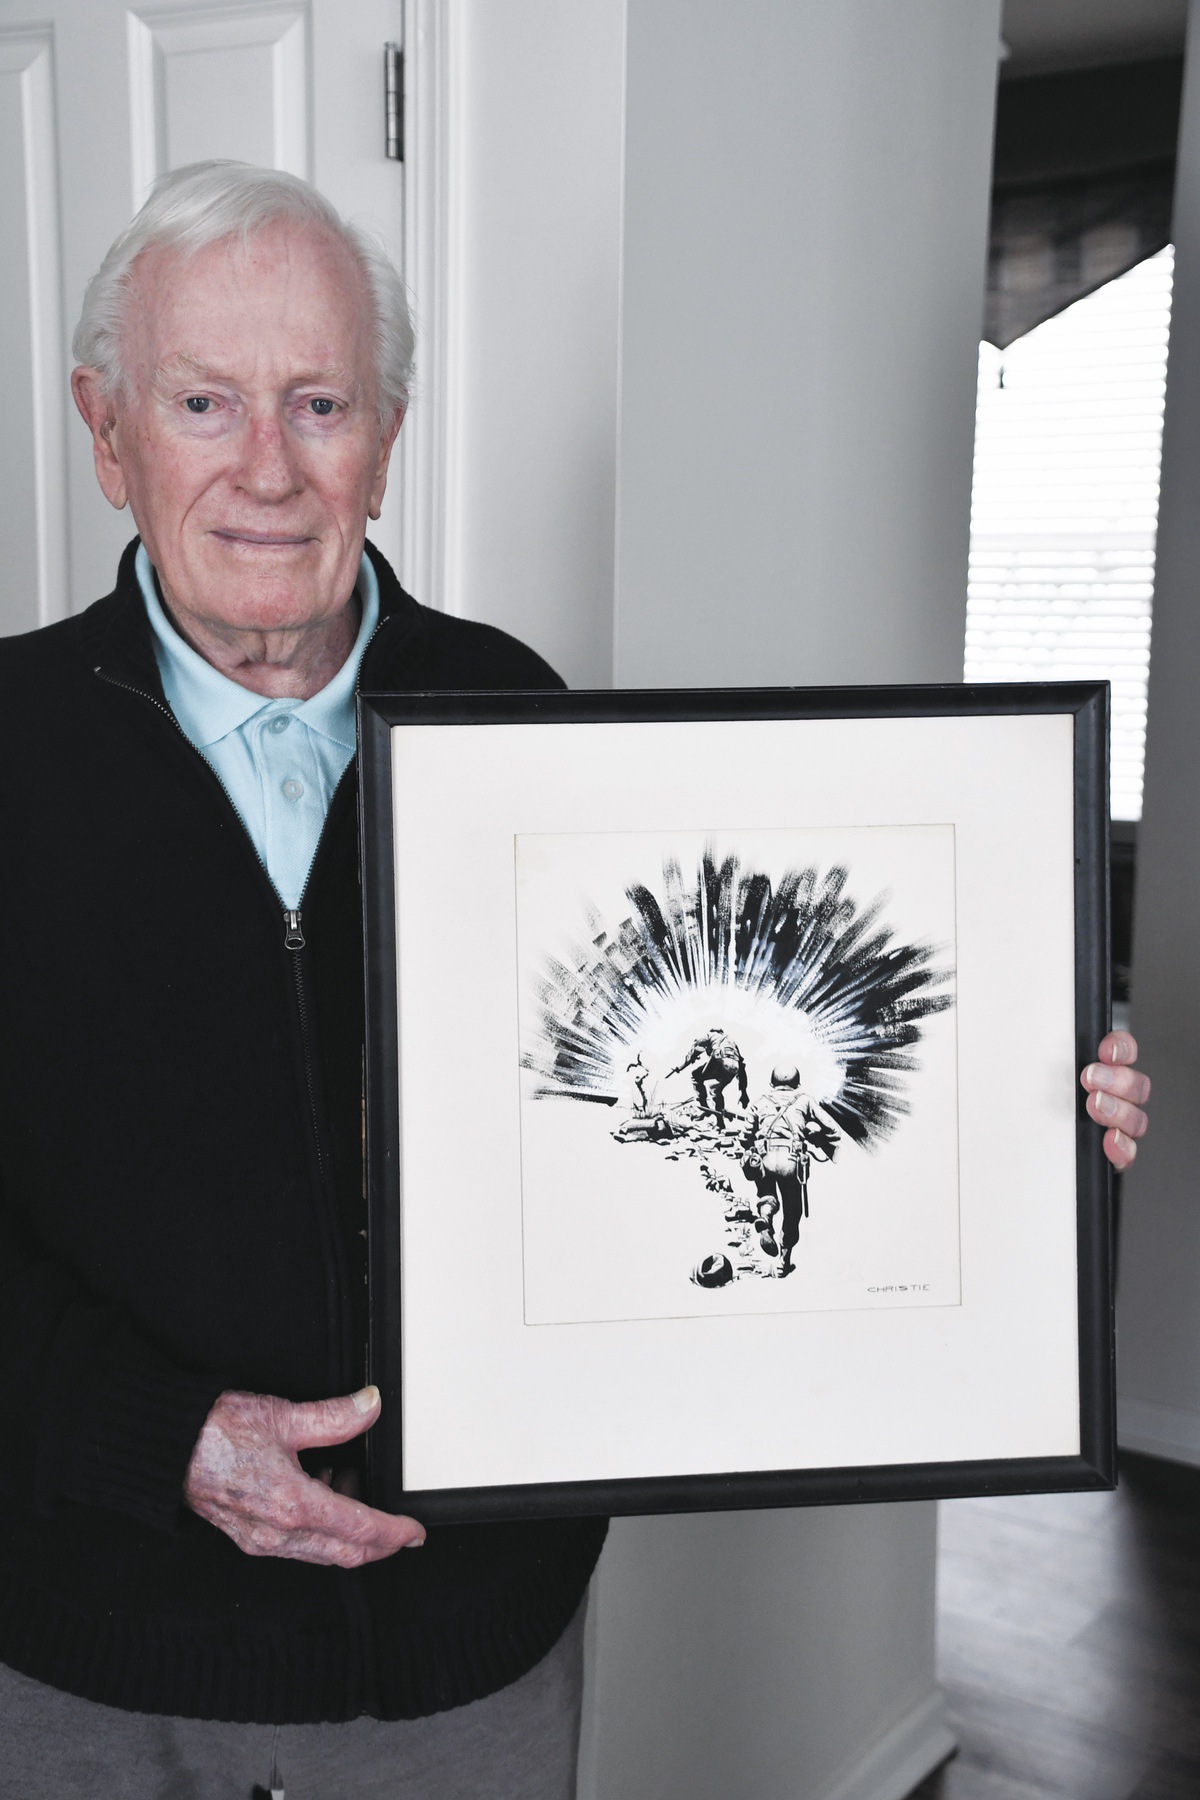 After his time in the Marines, Richard Christie, worked as an illustrator. Here he is with his illustrated photo for the WGN TV Series Men in War. (Photo by Christine Such/My Sun Day News)